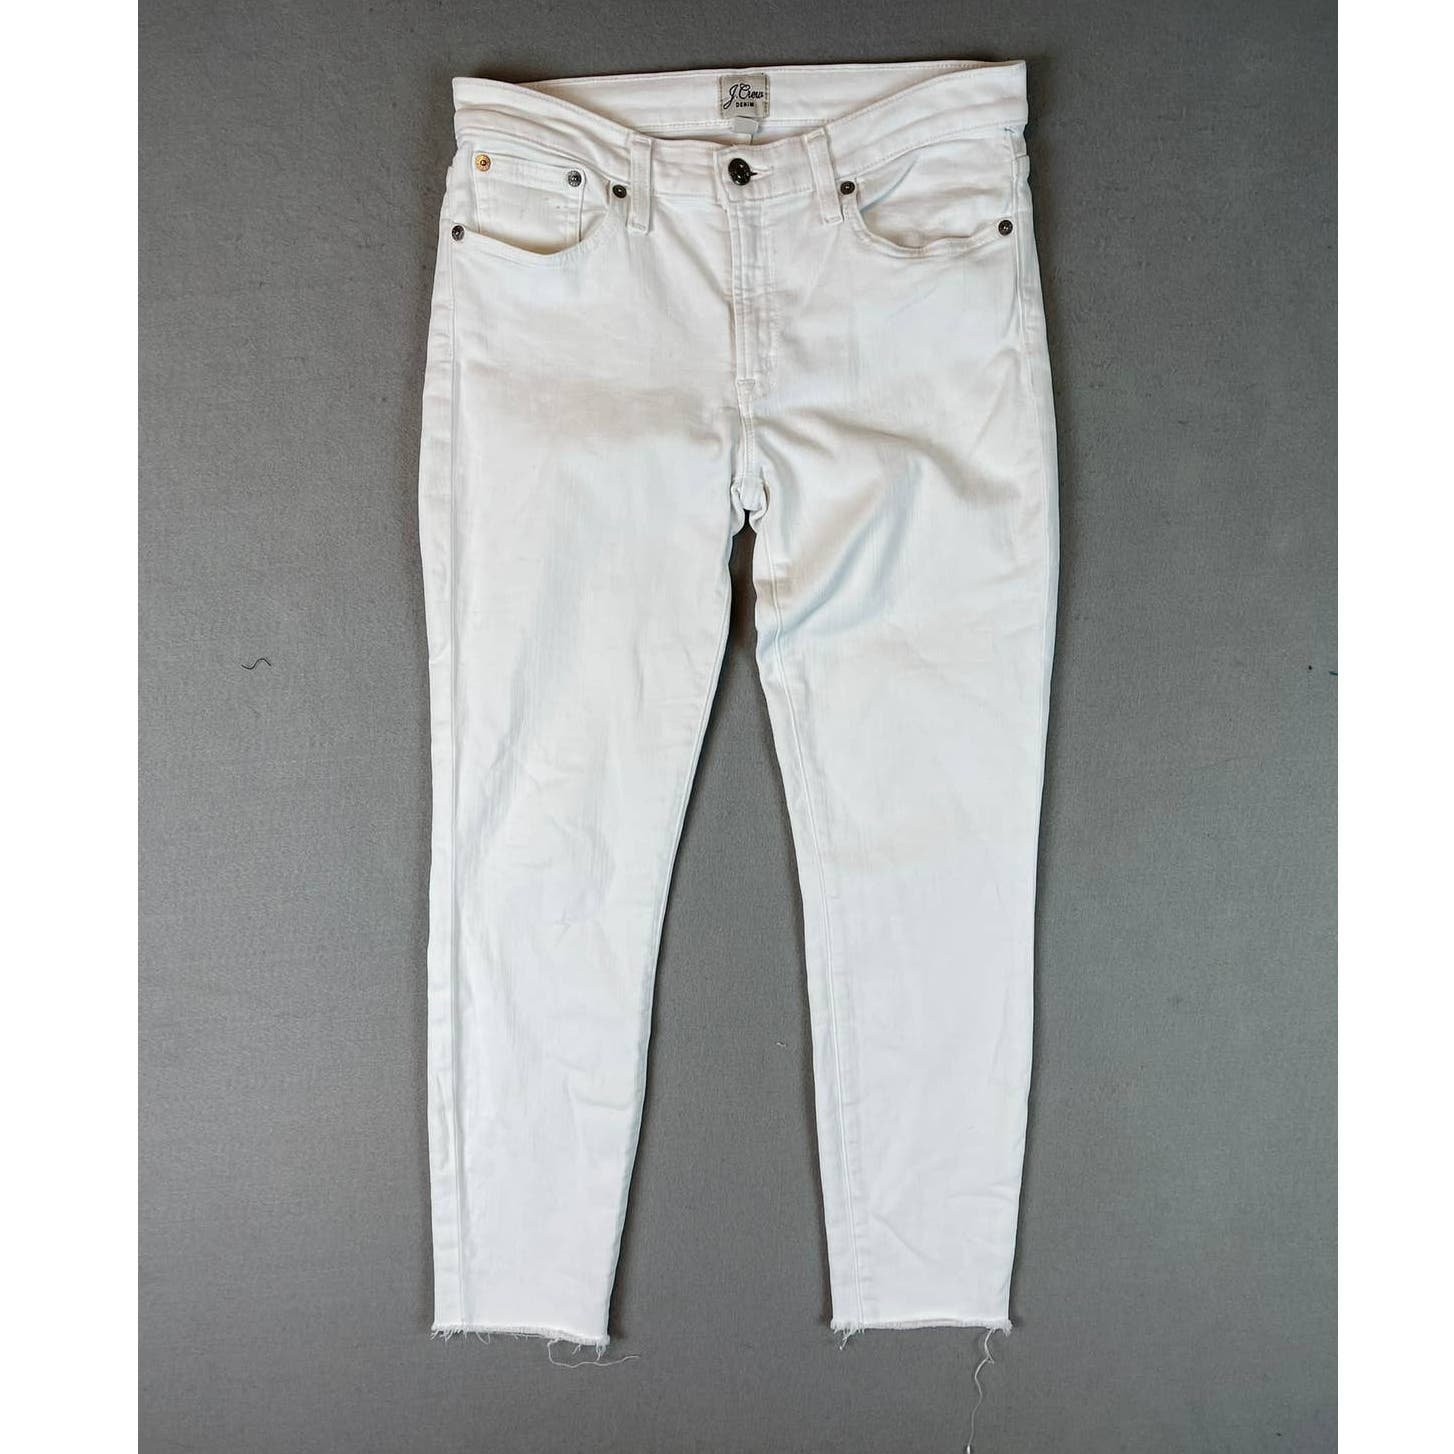 Affordable J. Crew Toothpick Denim Womens 28 White Jeans Ankle Cropped Raw Hem kvprJCy9A just for you